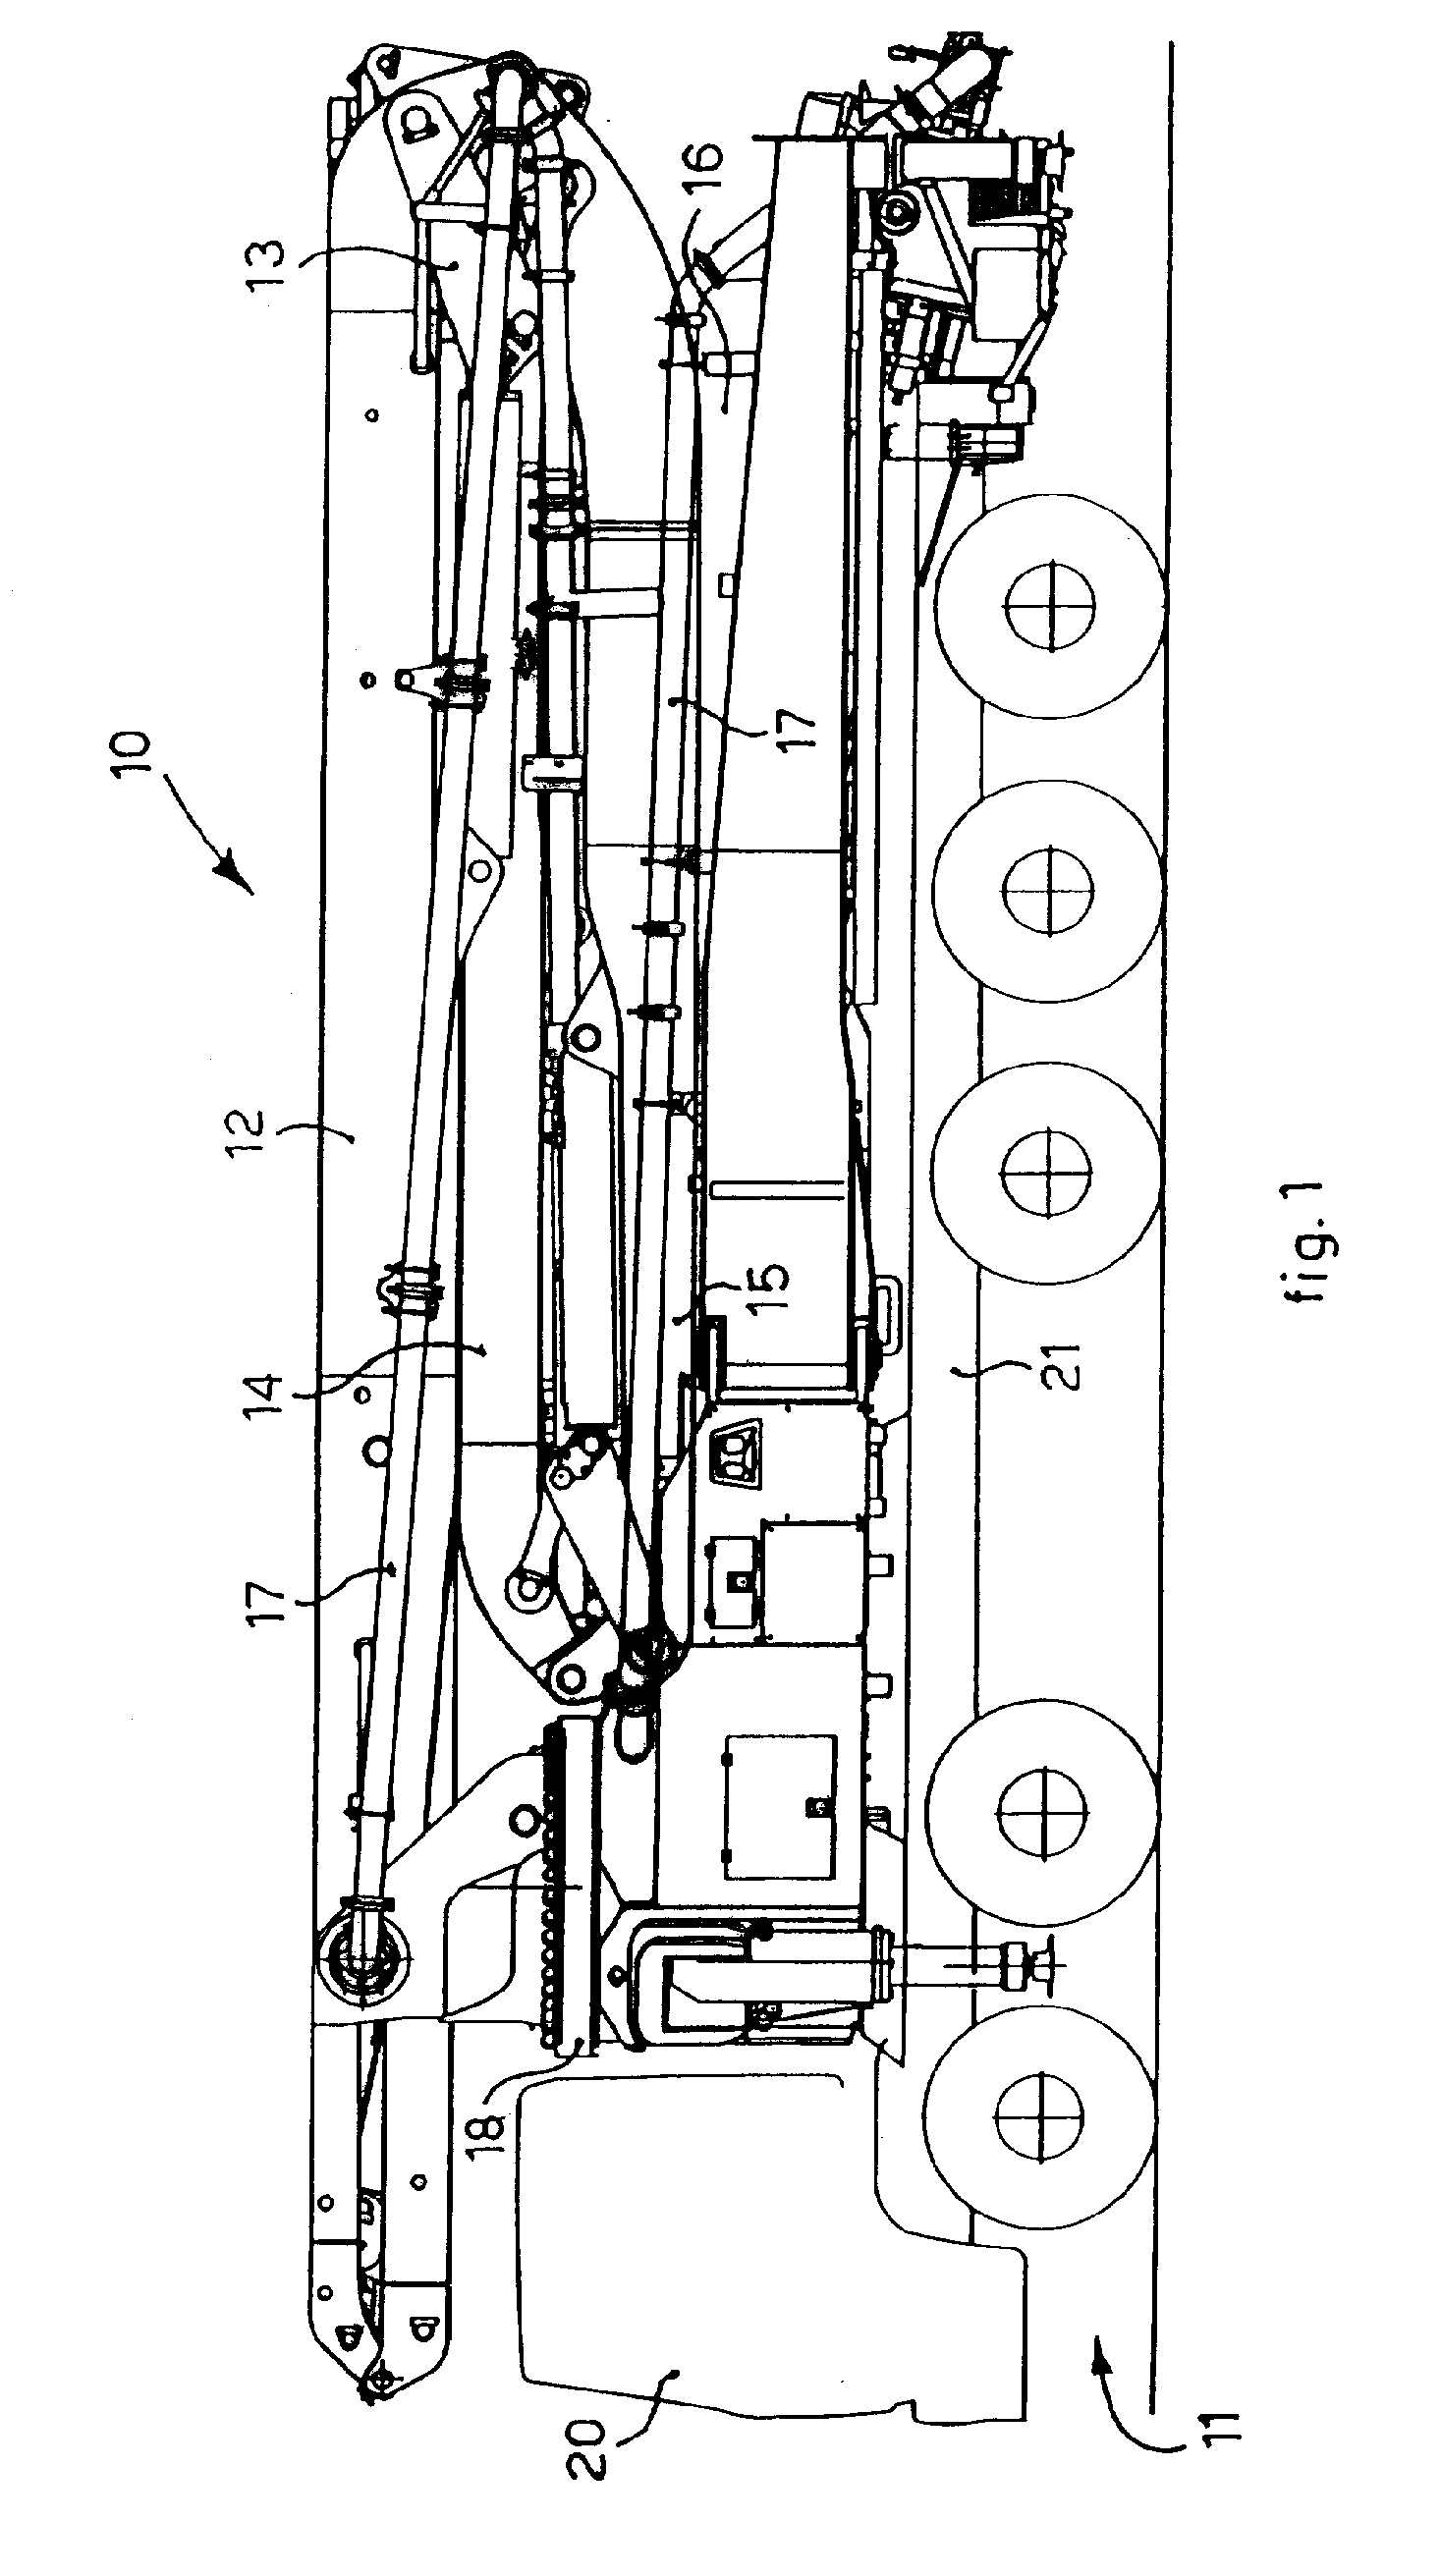 Device to actively control the vibrations of an articulated arm to pump concrete